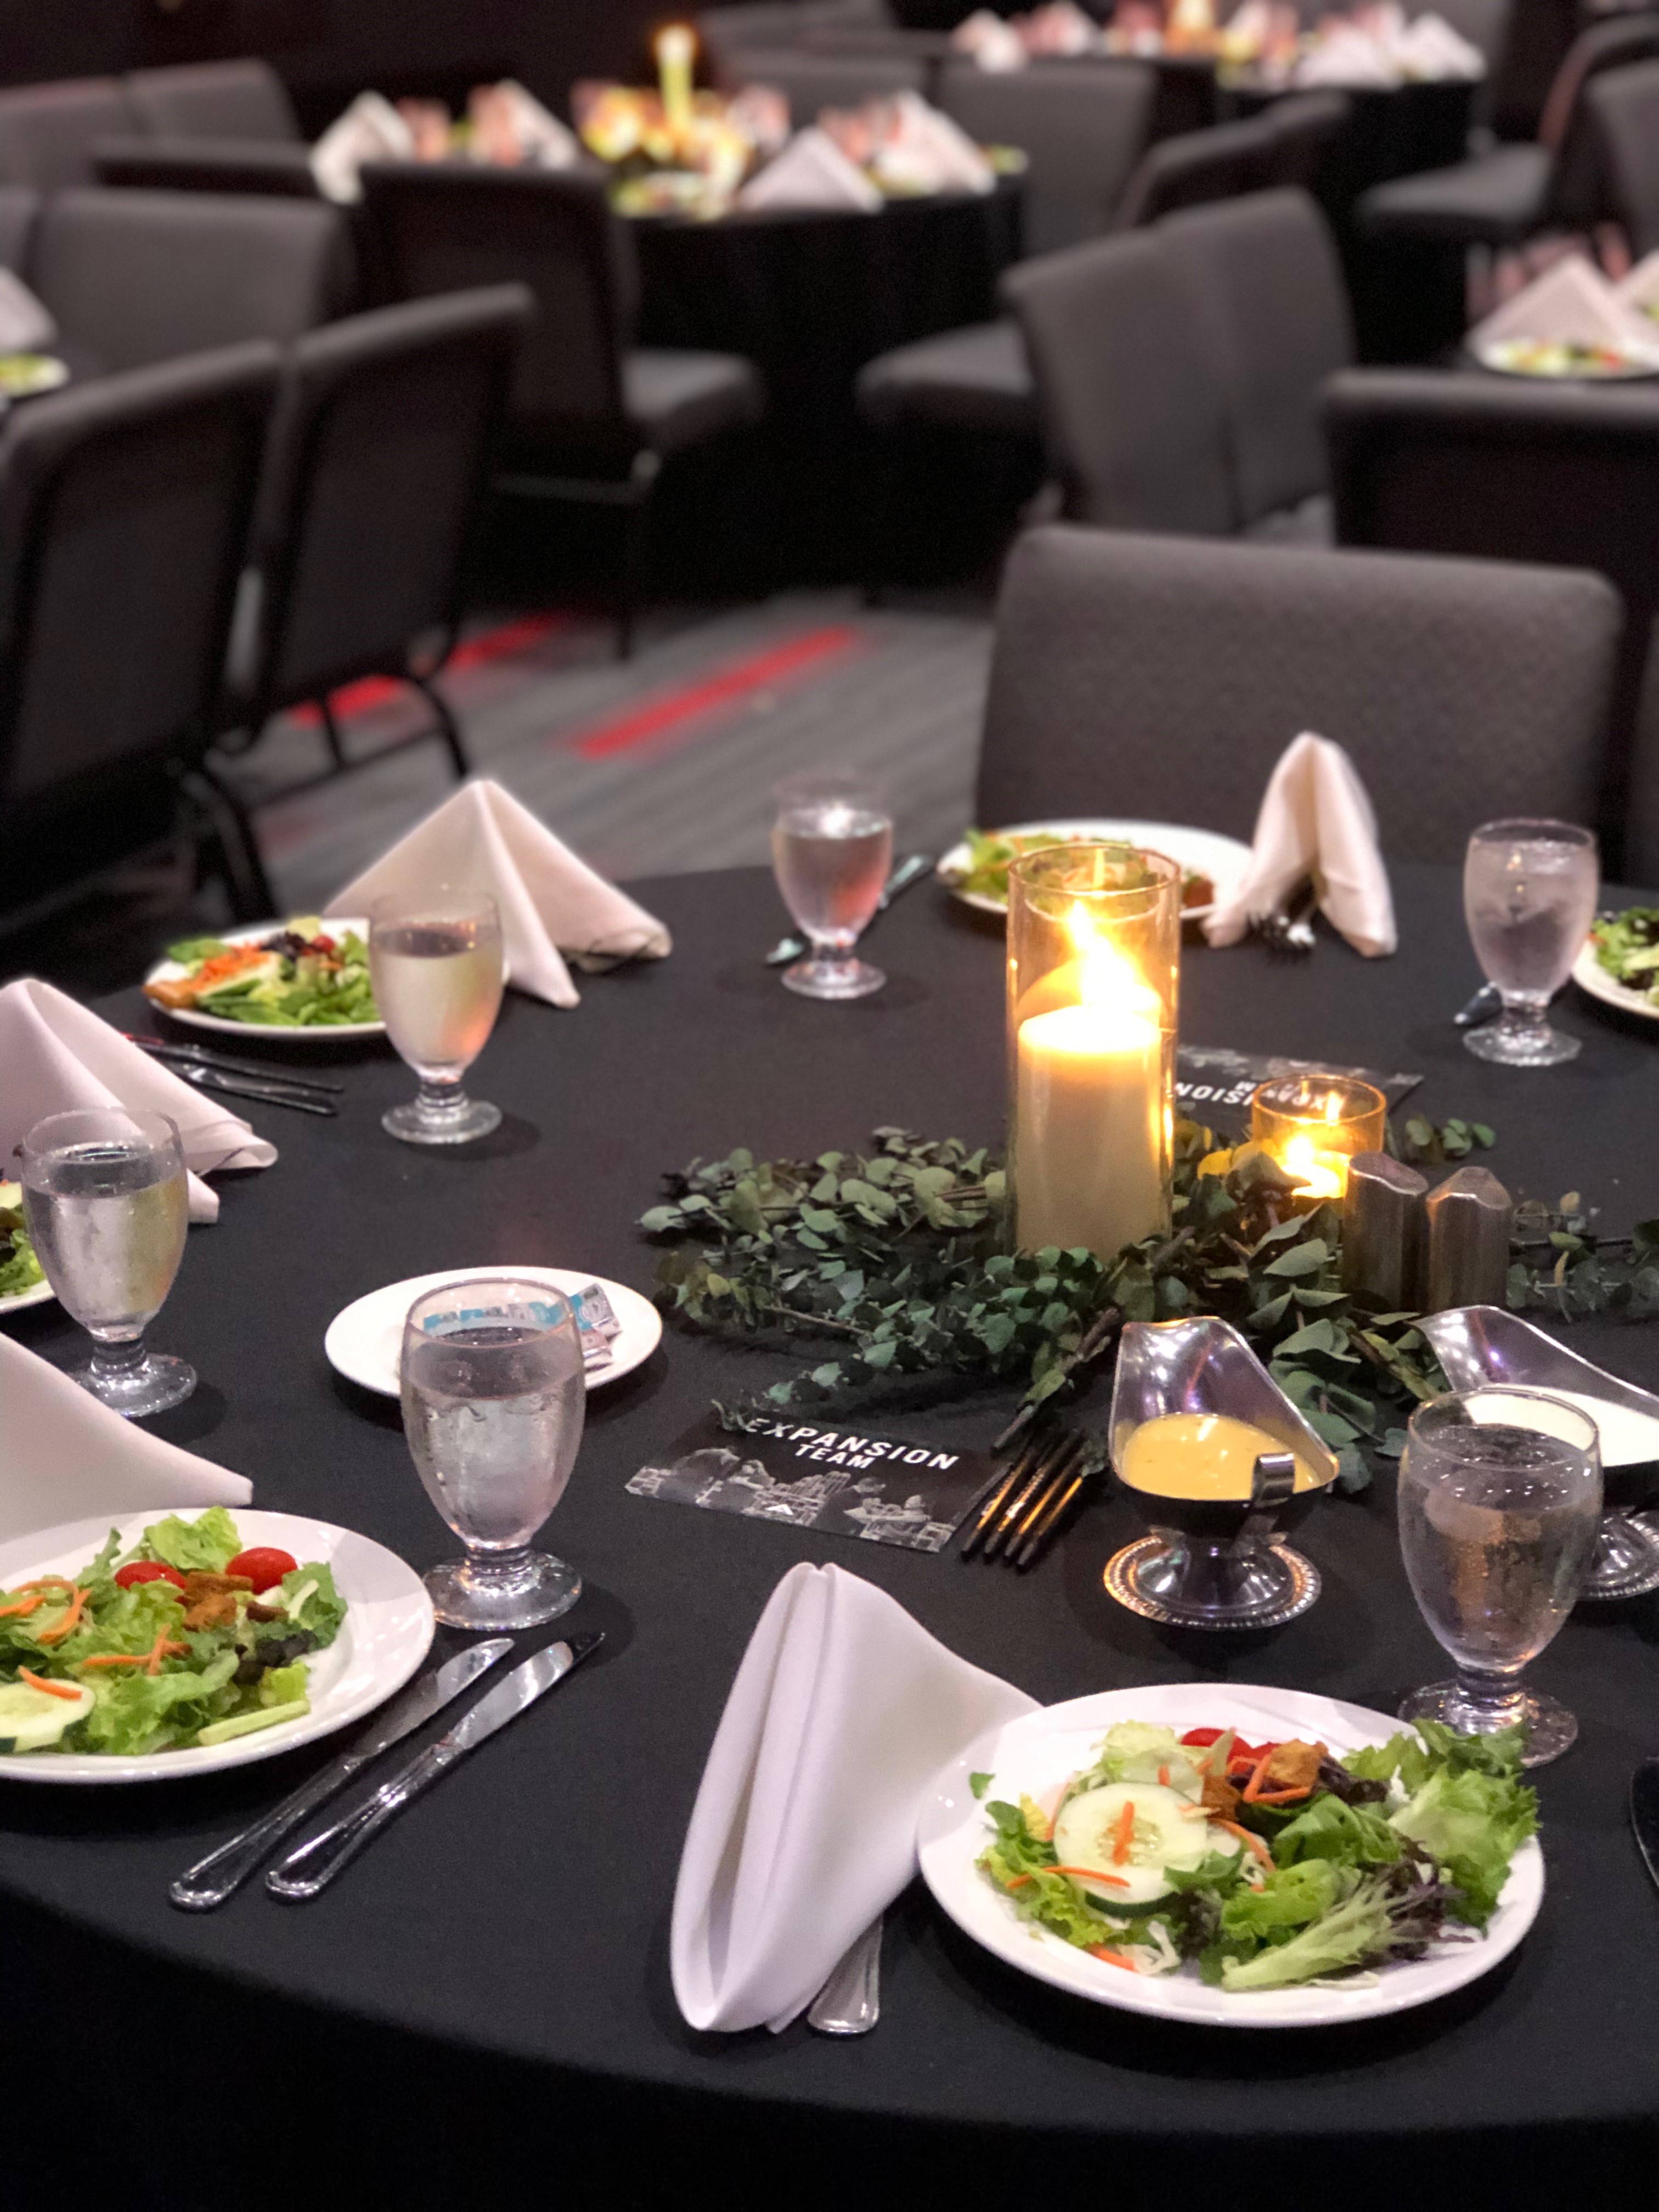 action church dubsdread catering august 2019